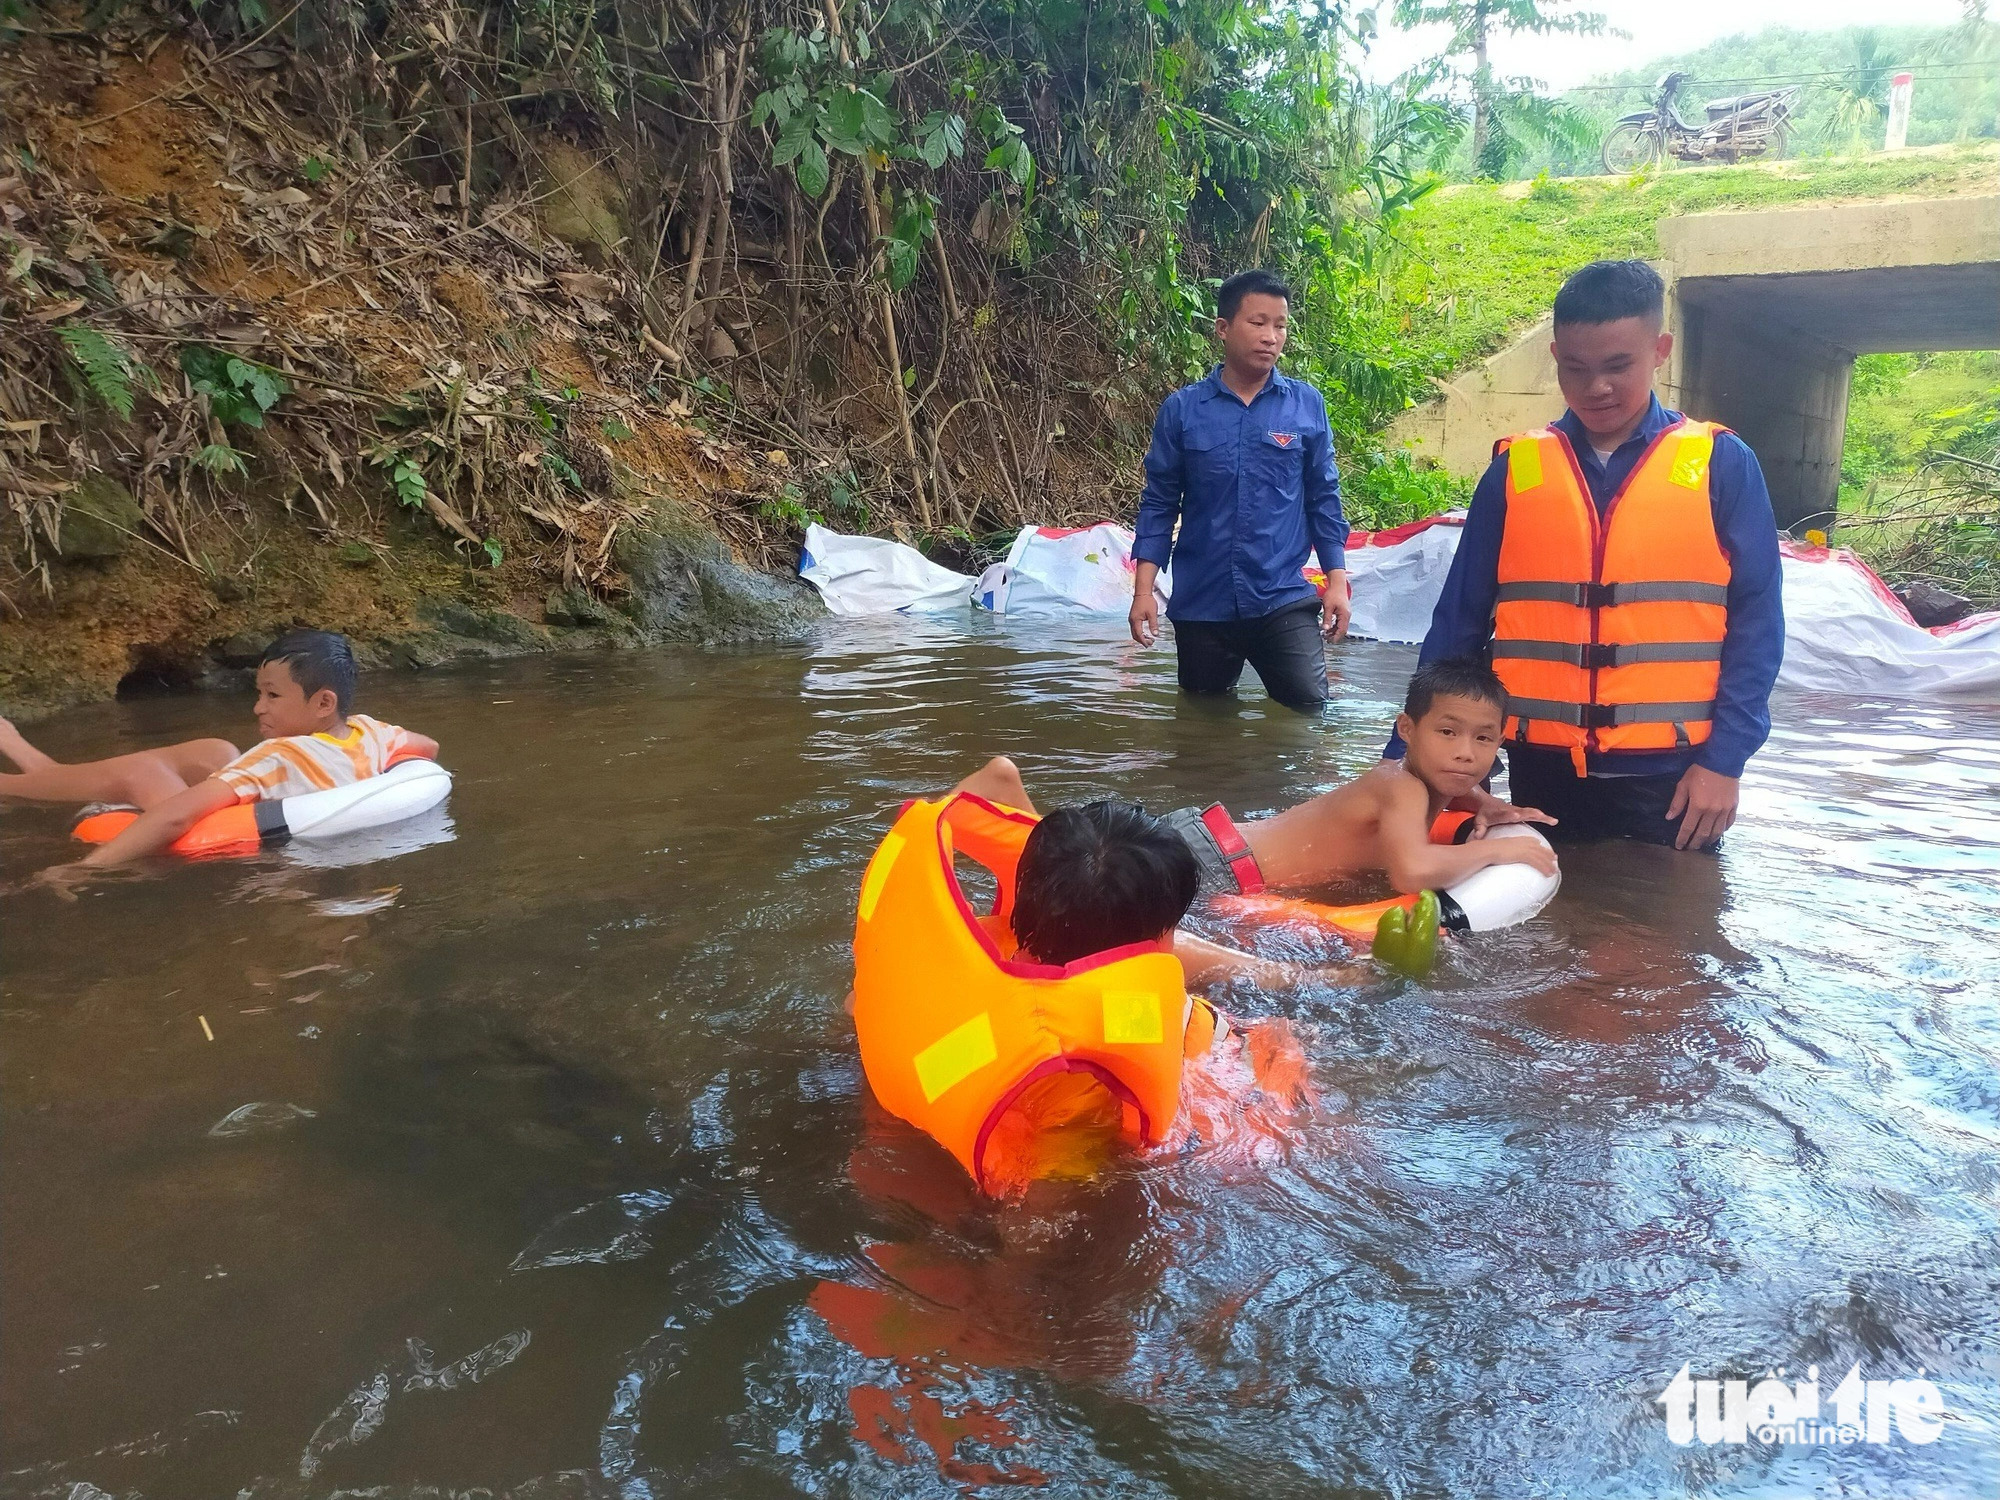 Members of the Ho Chi Minh Communist Youth Union in Que Phong District, Nghe An Province, north-central Vietnam set up a swimming pool at a spring to teach local kids how to swim. Photo: Doan Hoa / Tuoi Tre